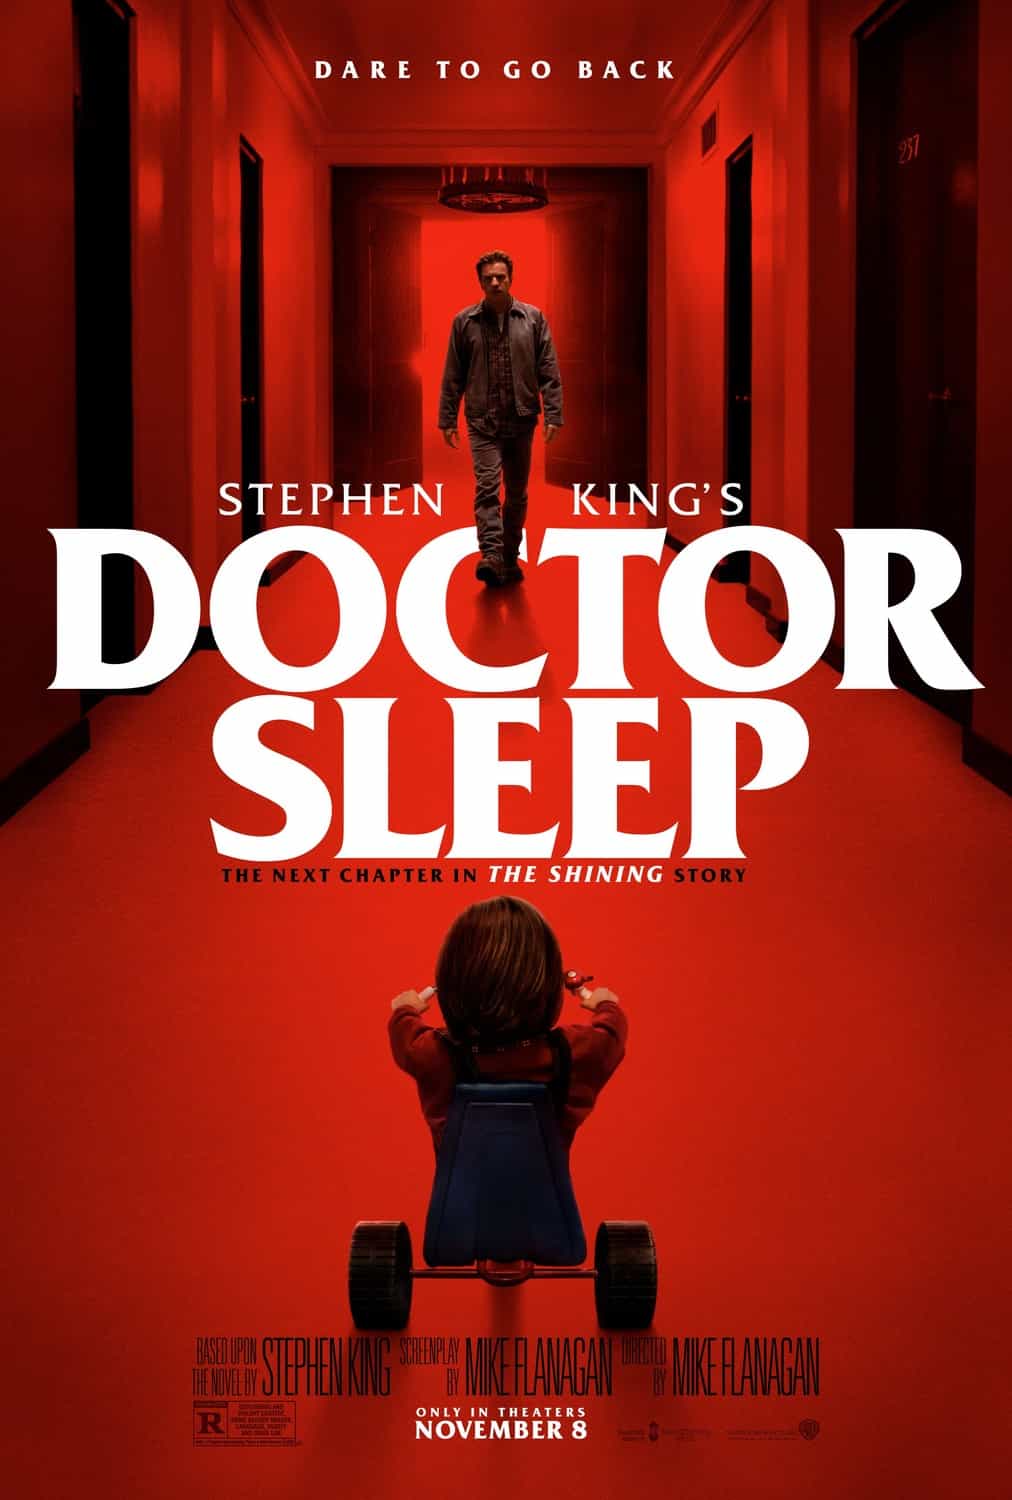 Doctor Sleep is given a 15 age rating in the UK for strong bloody violence, gore, horror, threat, language